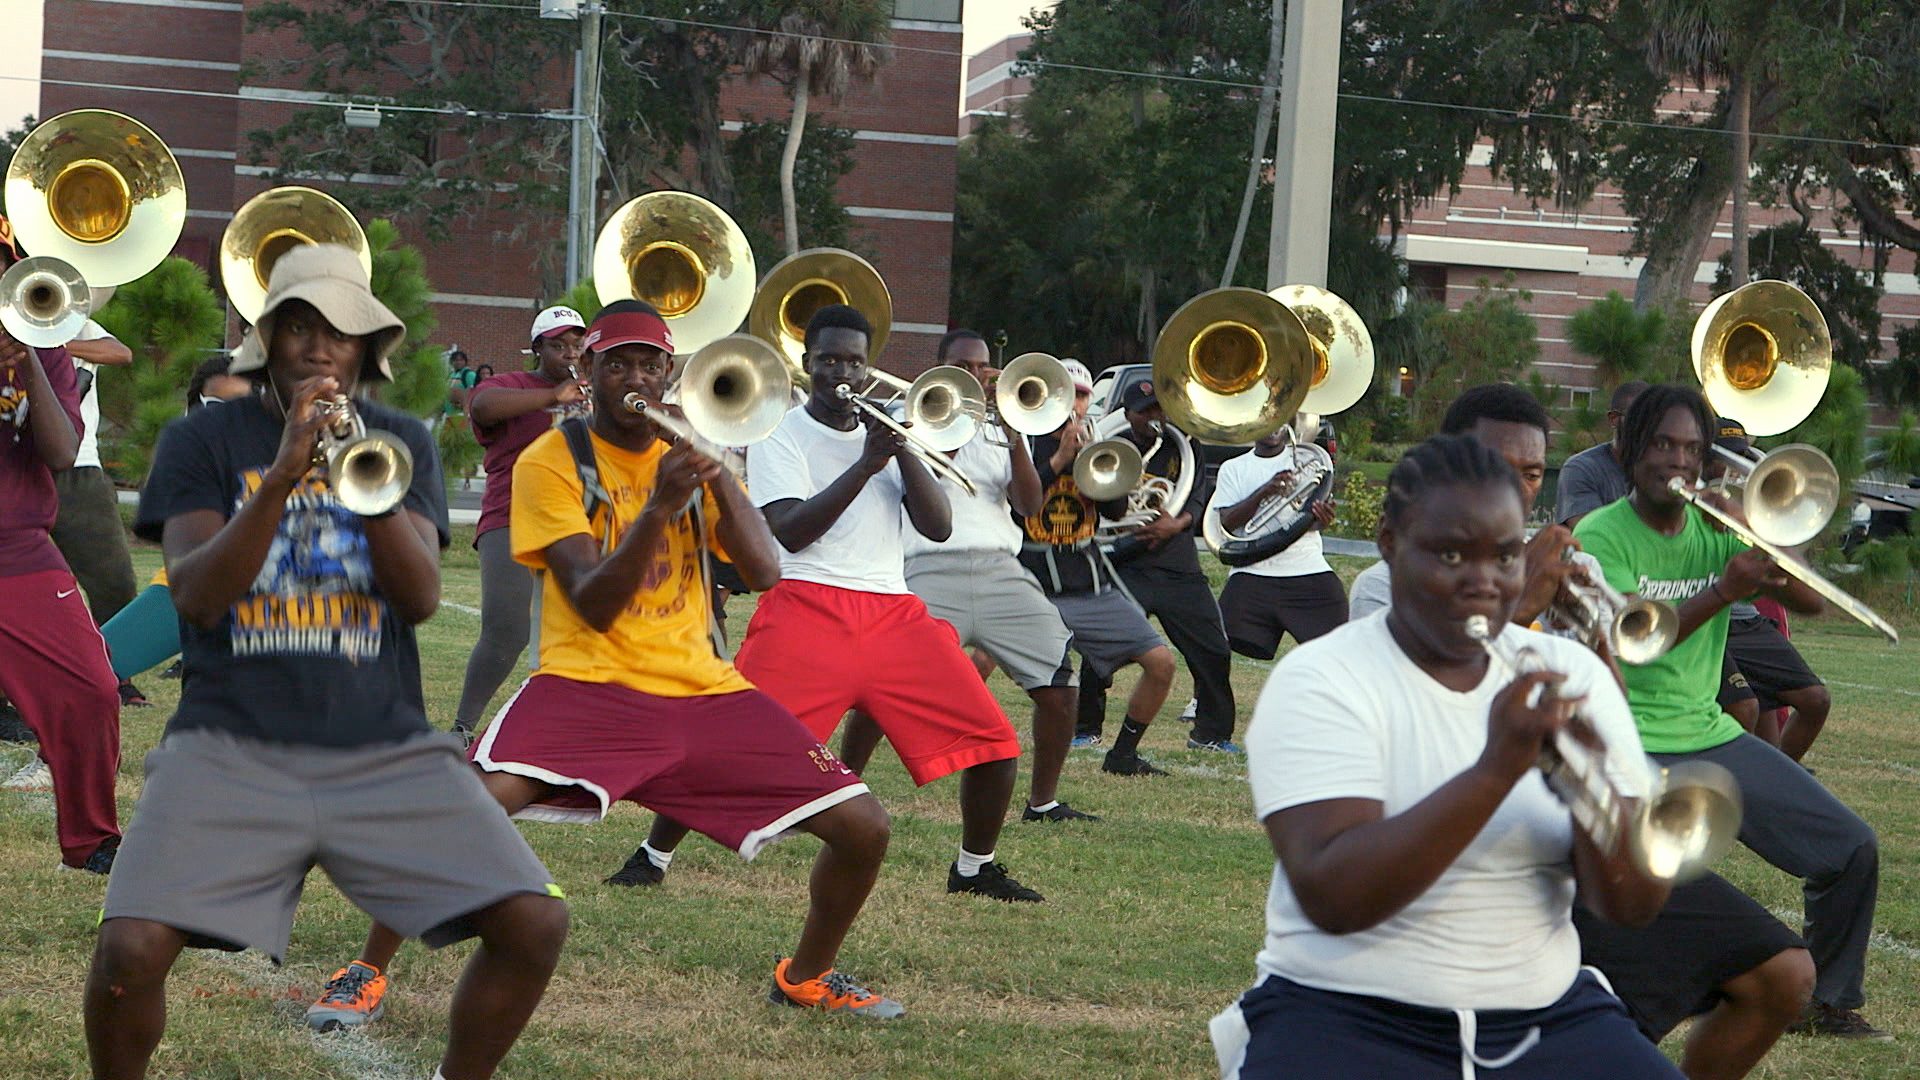 Band Practice, Field, Bethune-Cookman University, BCU, Marching Wildcats, Marching Orders, Stage 13 Original, stage13network